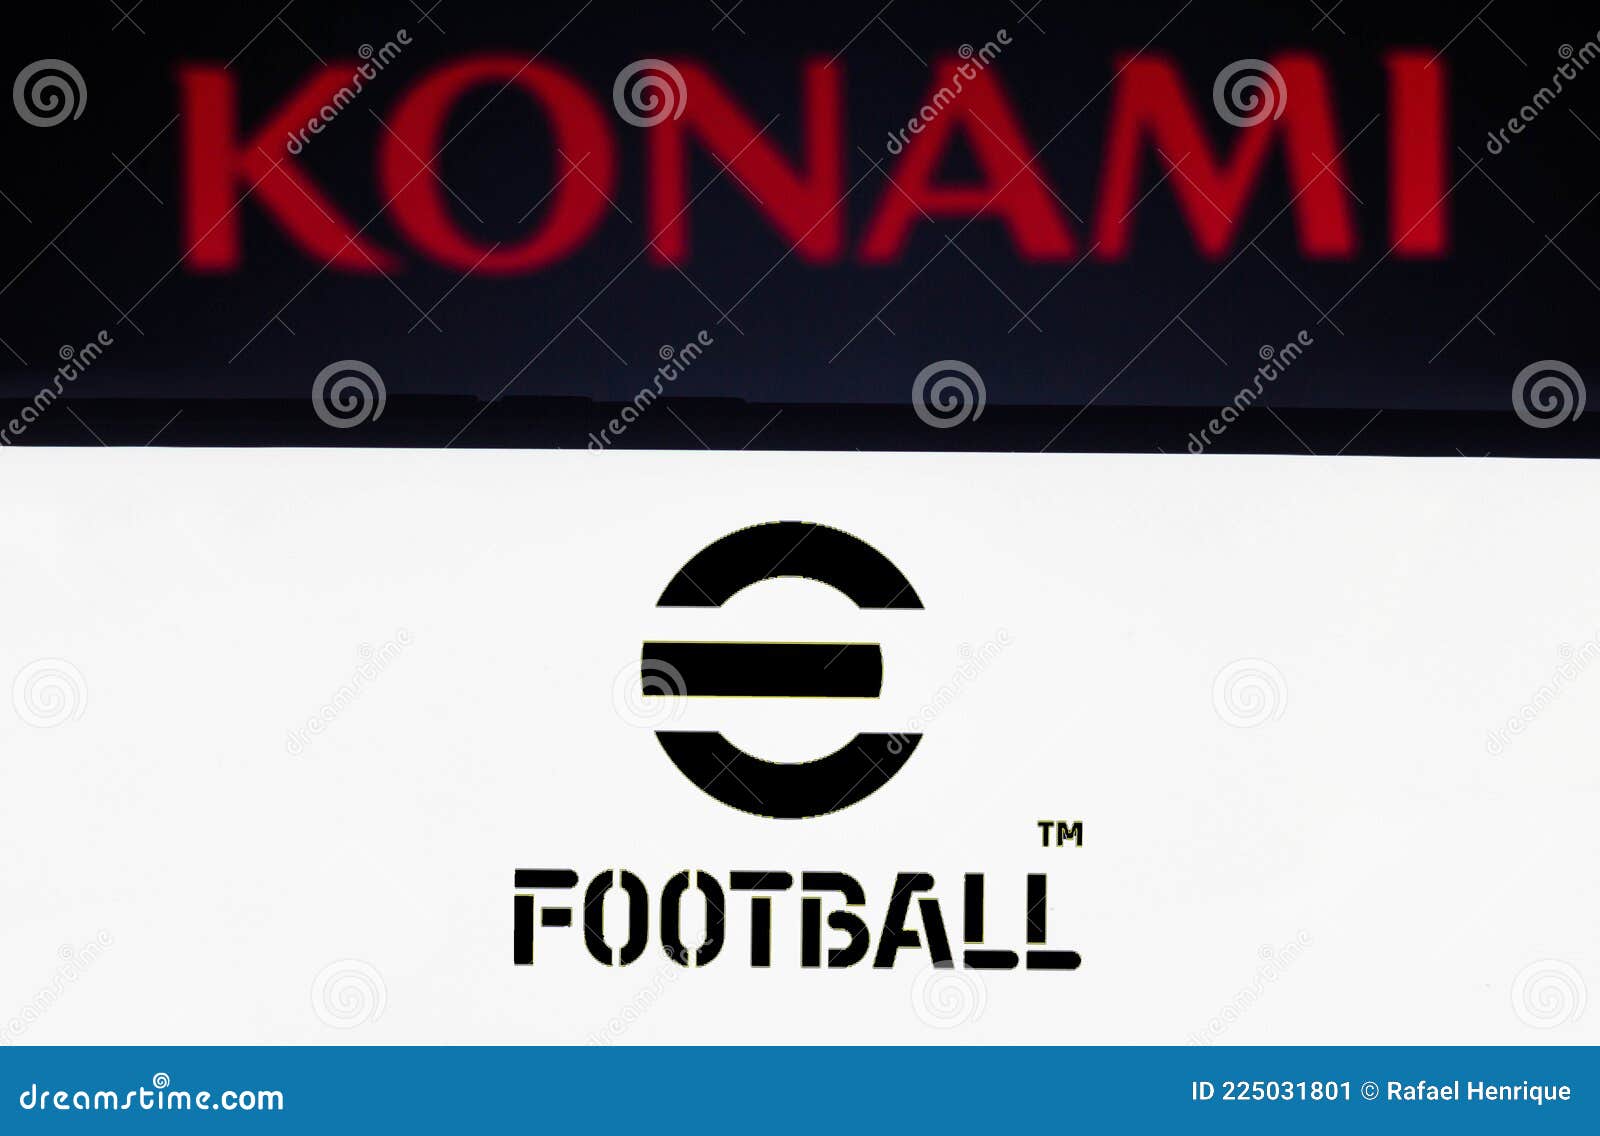 July 21 21 Brazil In This Photo Illustration The Efootball Logo Game Seen Displayed On A Smartphone Konami Reveals That Pro Editorial Photo Image Of Company Page